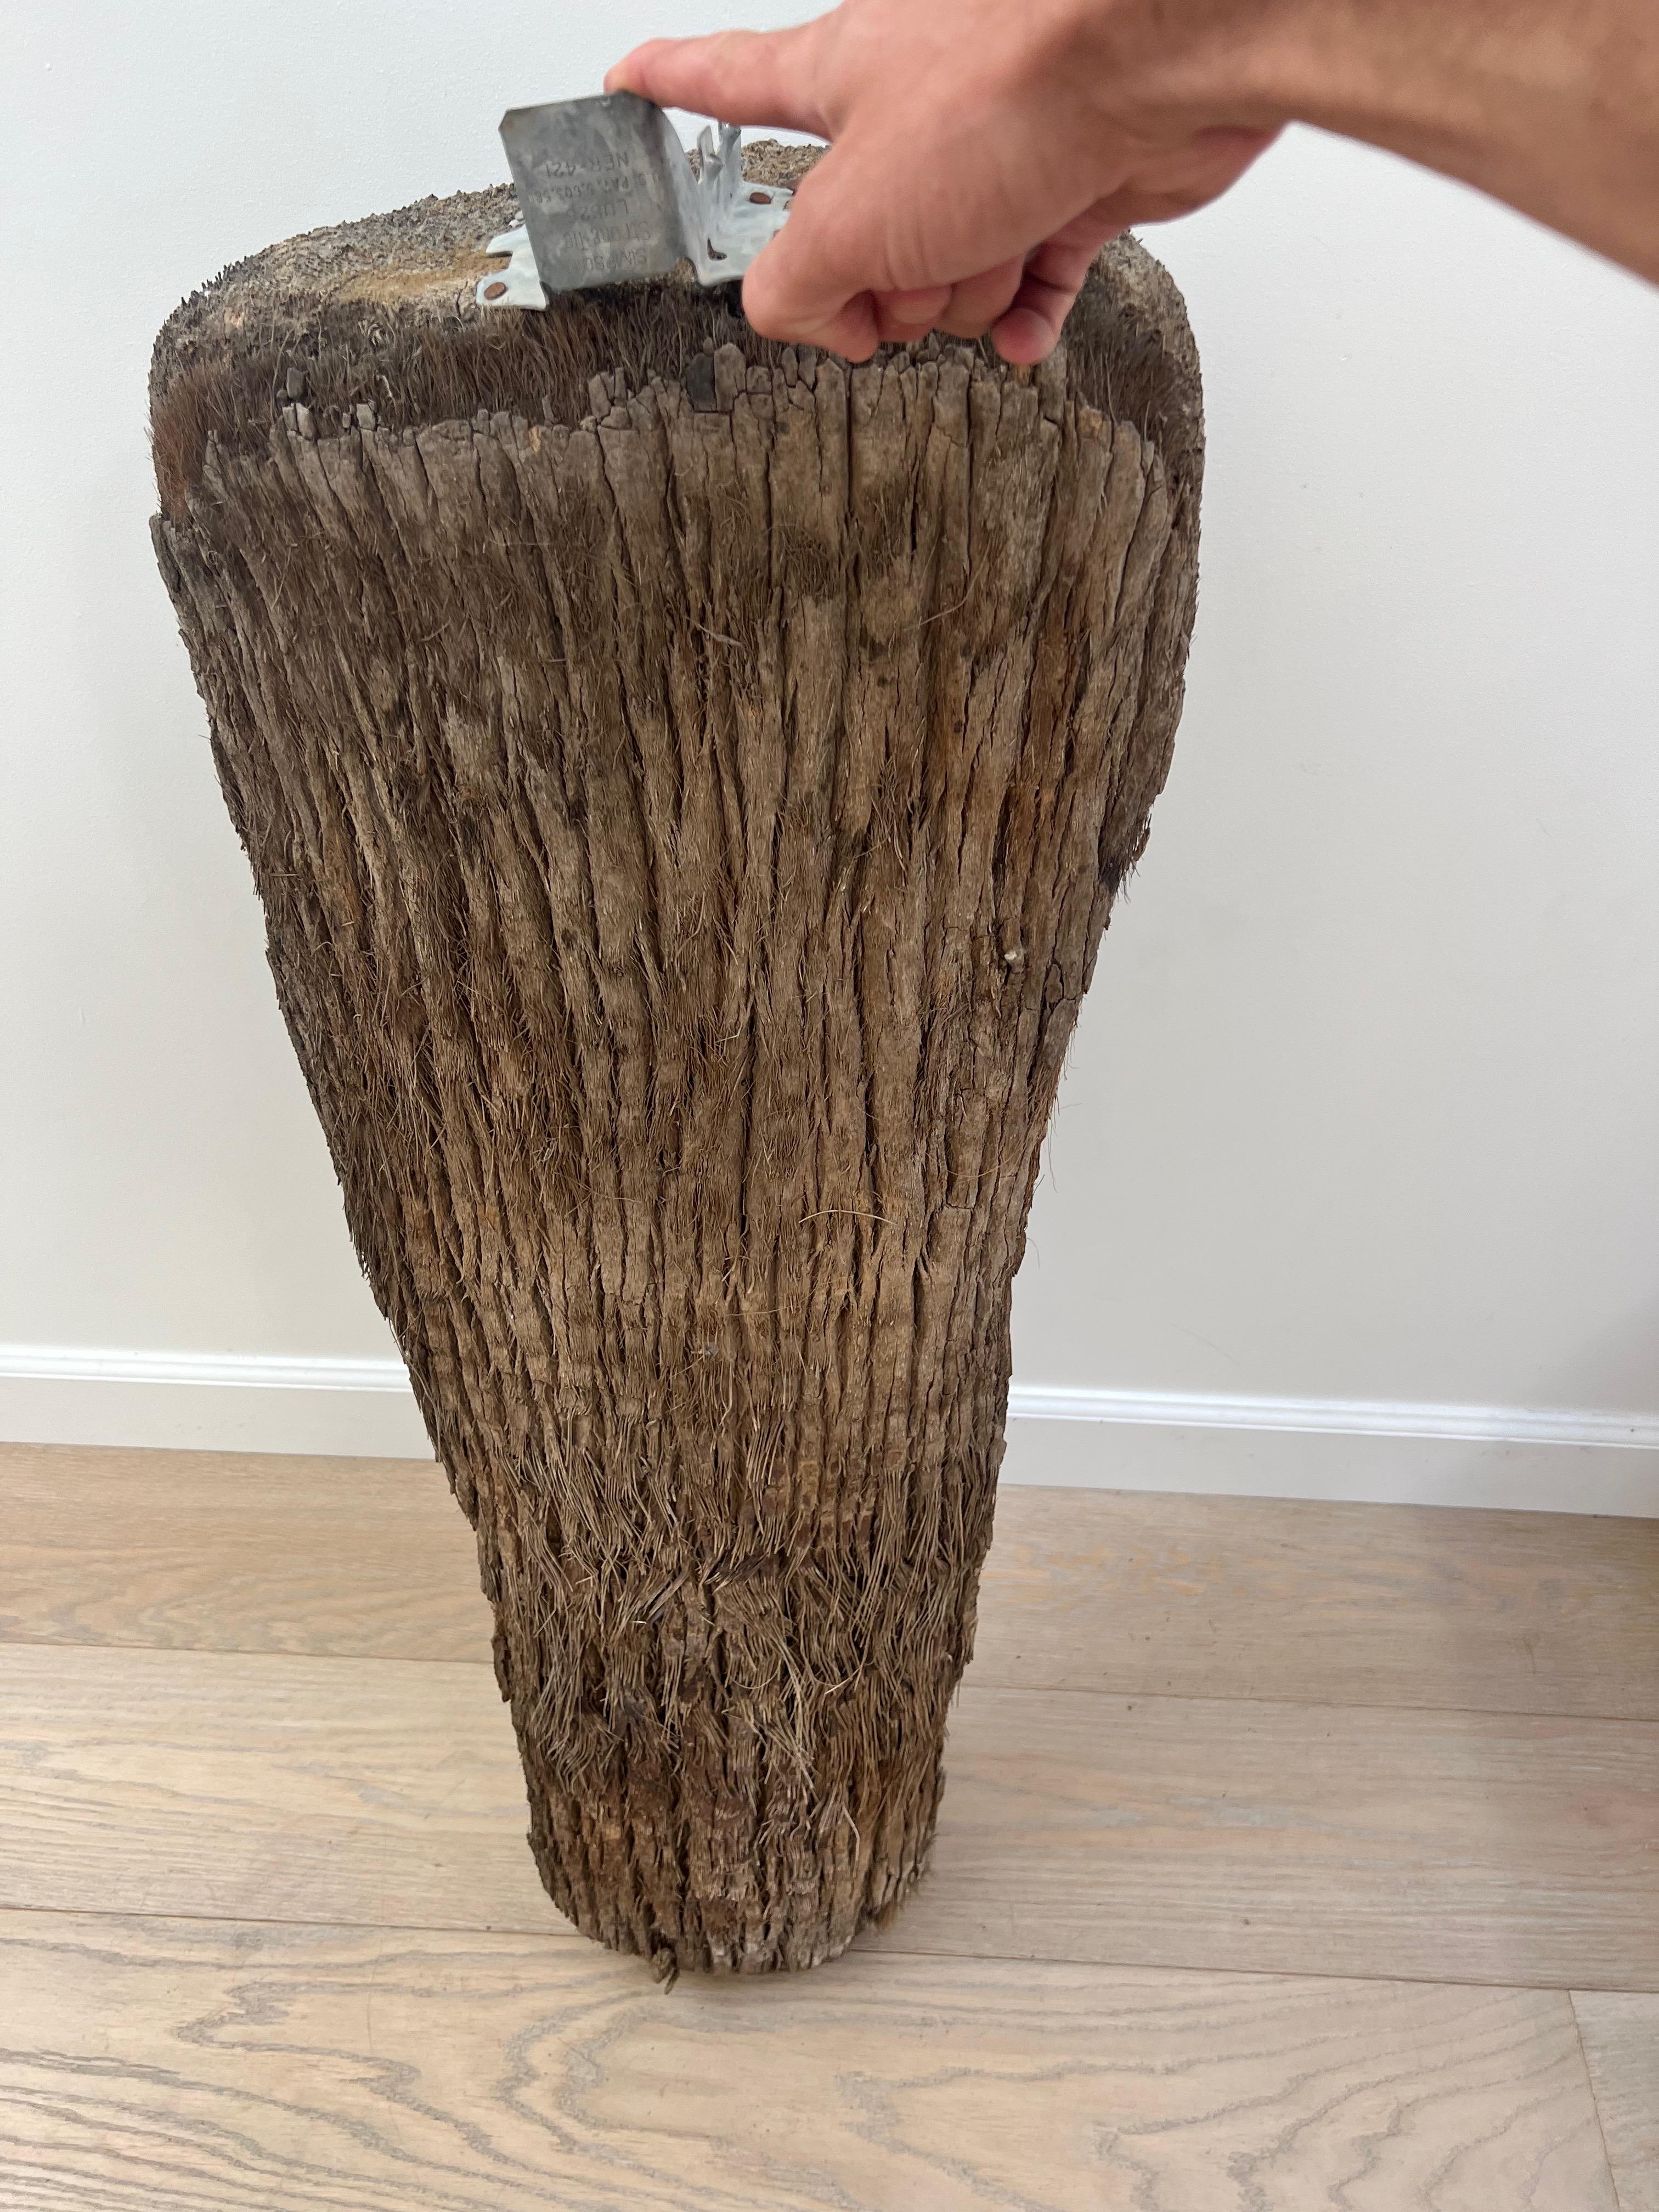 20th Century Tiki Head Sculpture from Palmwood 1960s Americana For Sale